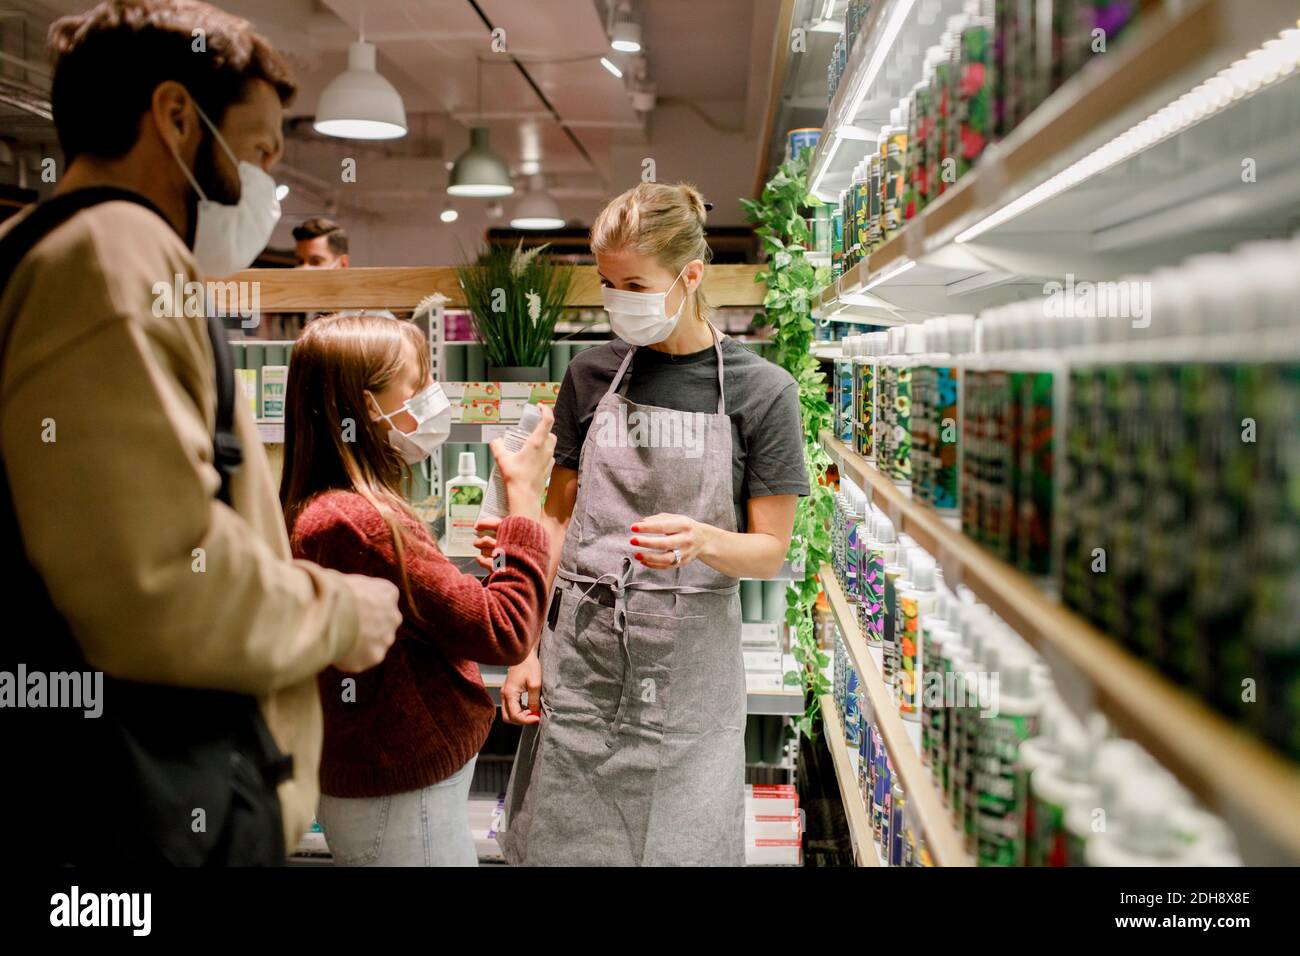 Girl talking to saleswoman by father in supermarket during COVID-19 Stock Photo